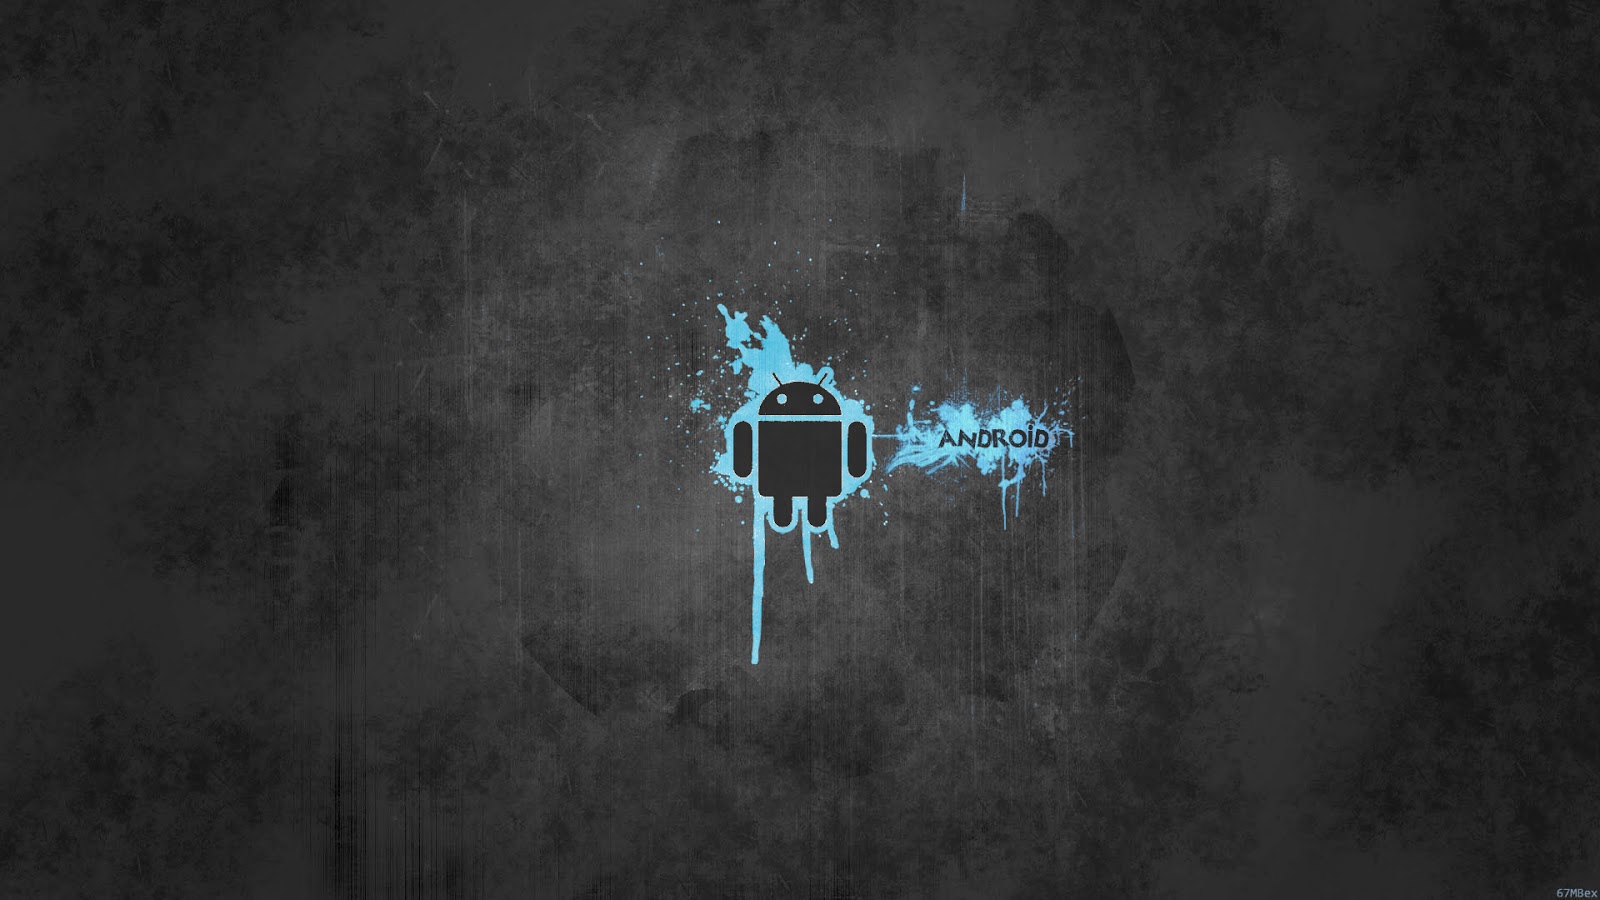 Free Download Android Grafity Full Hd Wallpaper Mobzip 1600x900 For Your Desktop Mobile Tablet Explore 47 Android Phone Wallpapers Hd Android Hd Wallpapers For Mobile Wallpaper For Android Phones Android Wallpapers